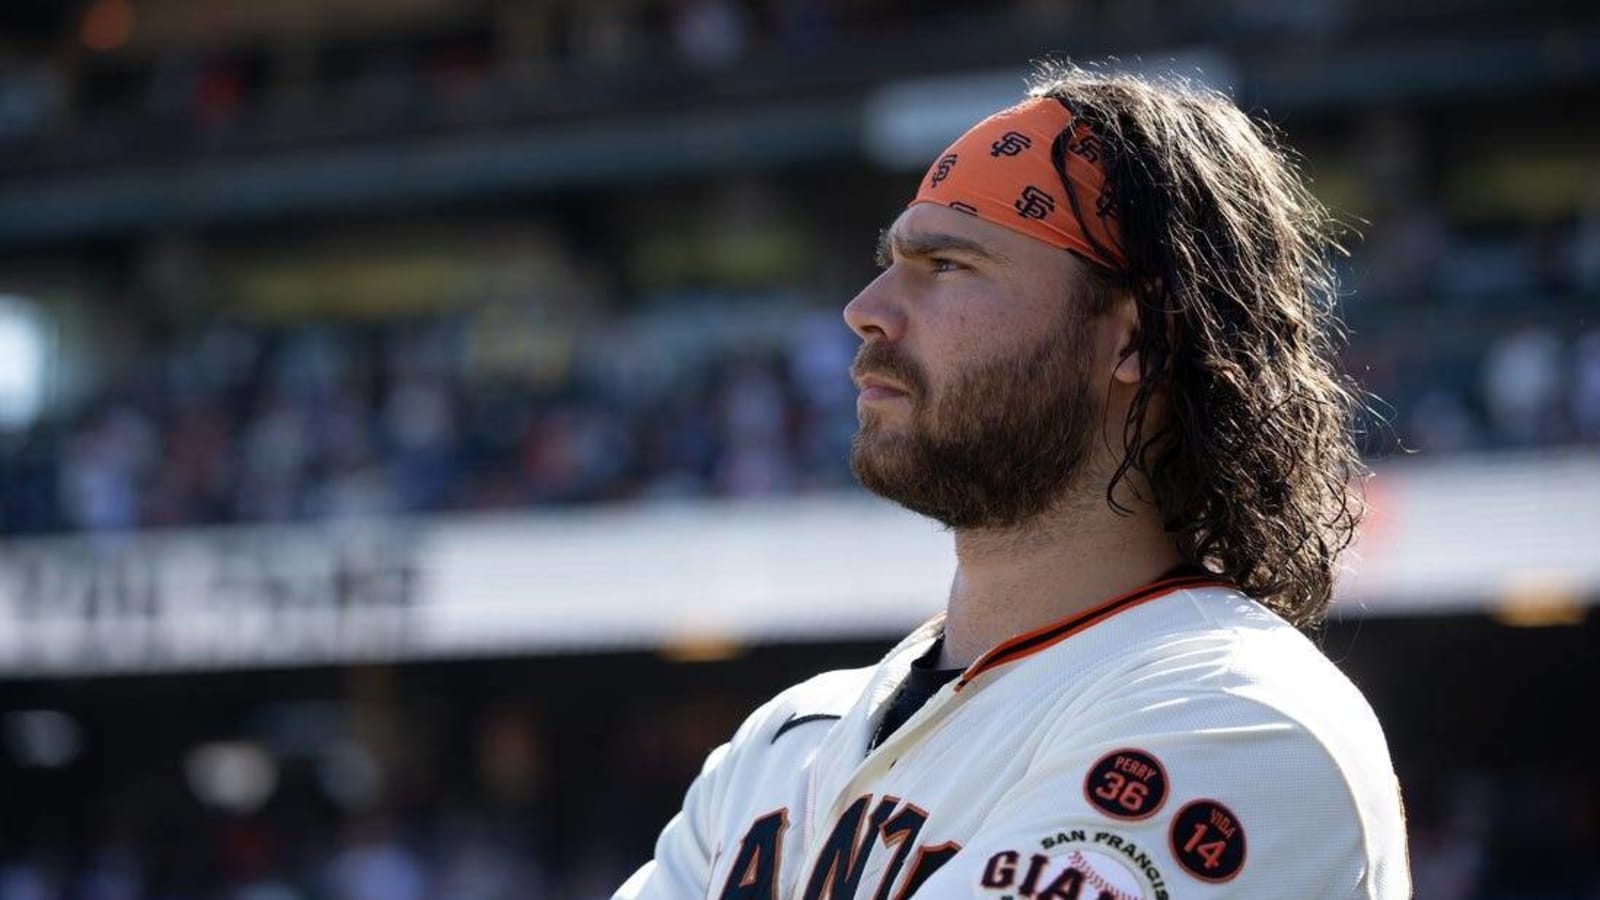 Cardinals sign INF Brandon Crawford to 1-year contract